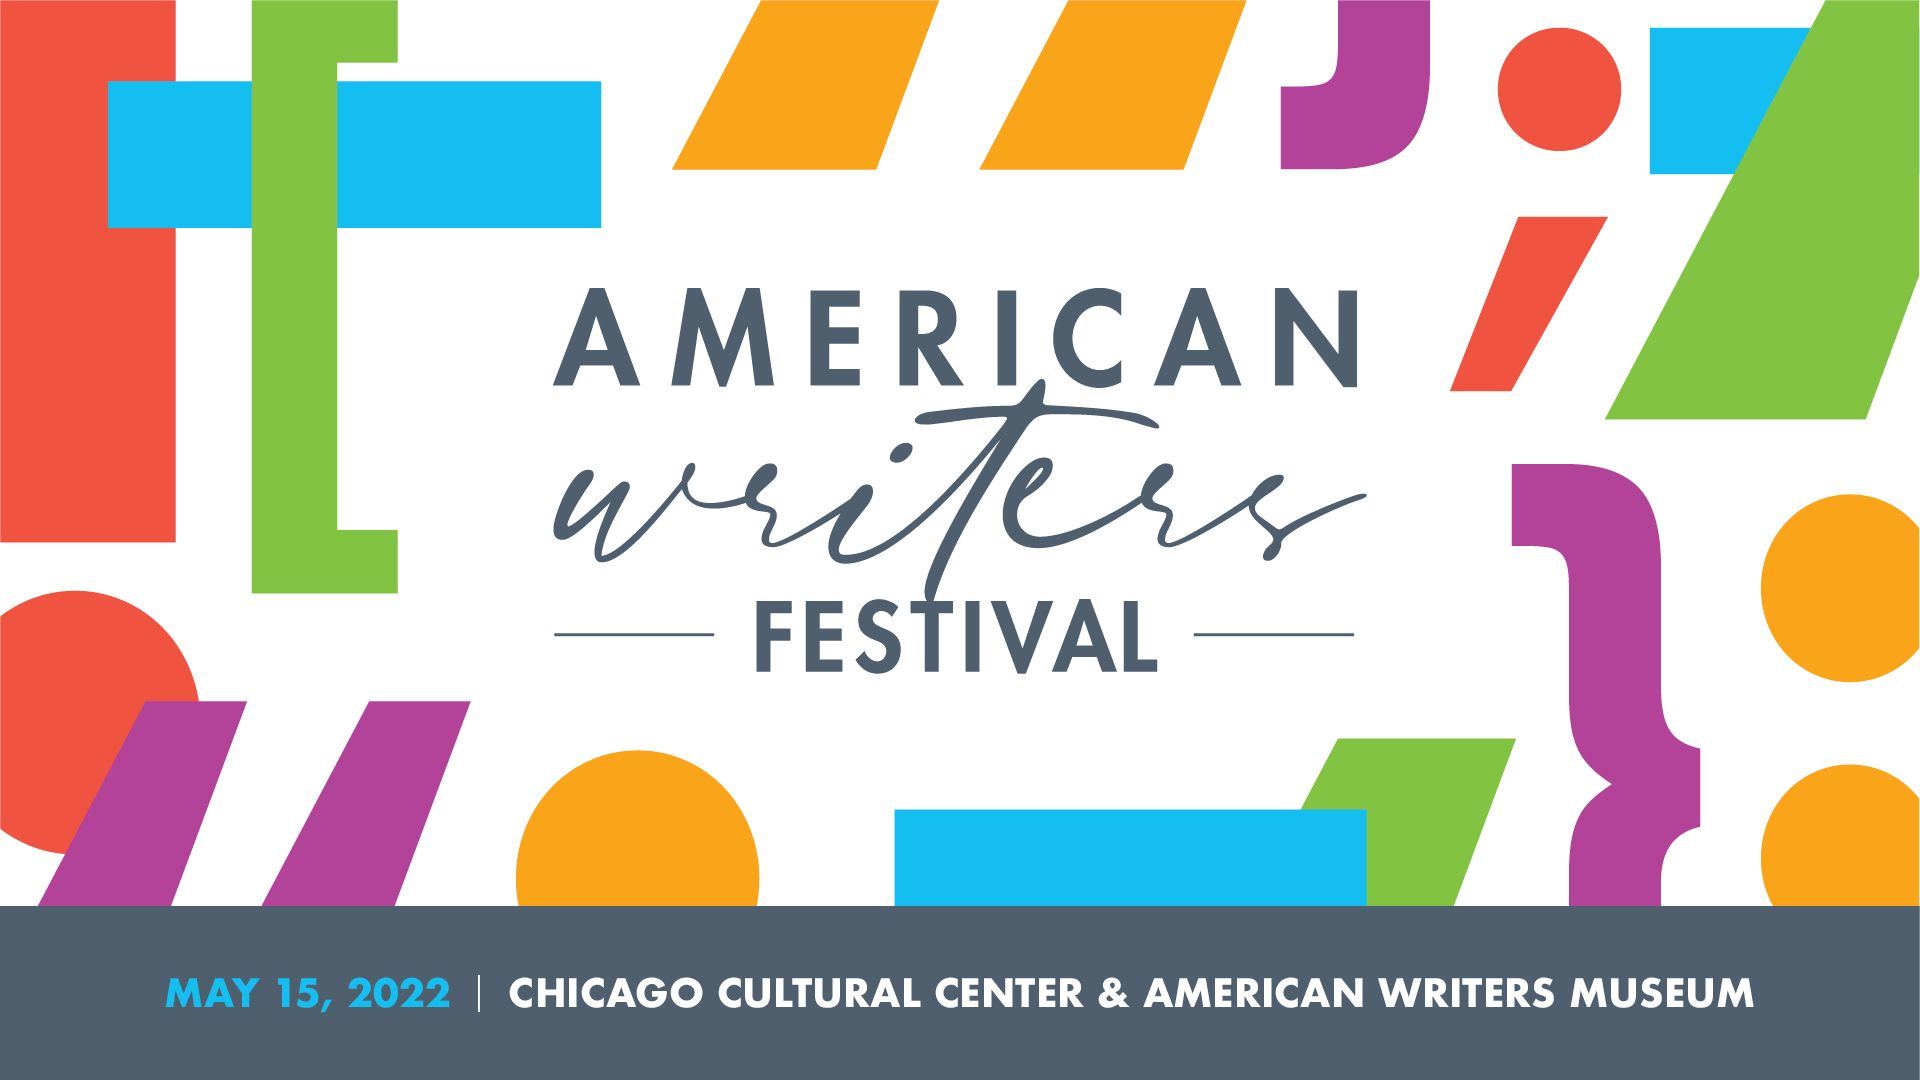 American Writers Festival on May 15, 2022 at the Chicago Cultural Center & American Writers Museum in downtown Chicago